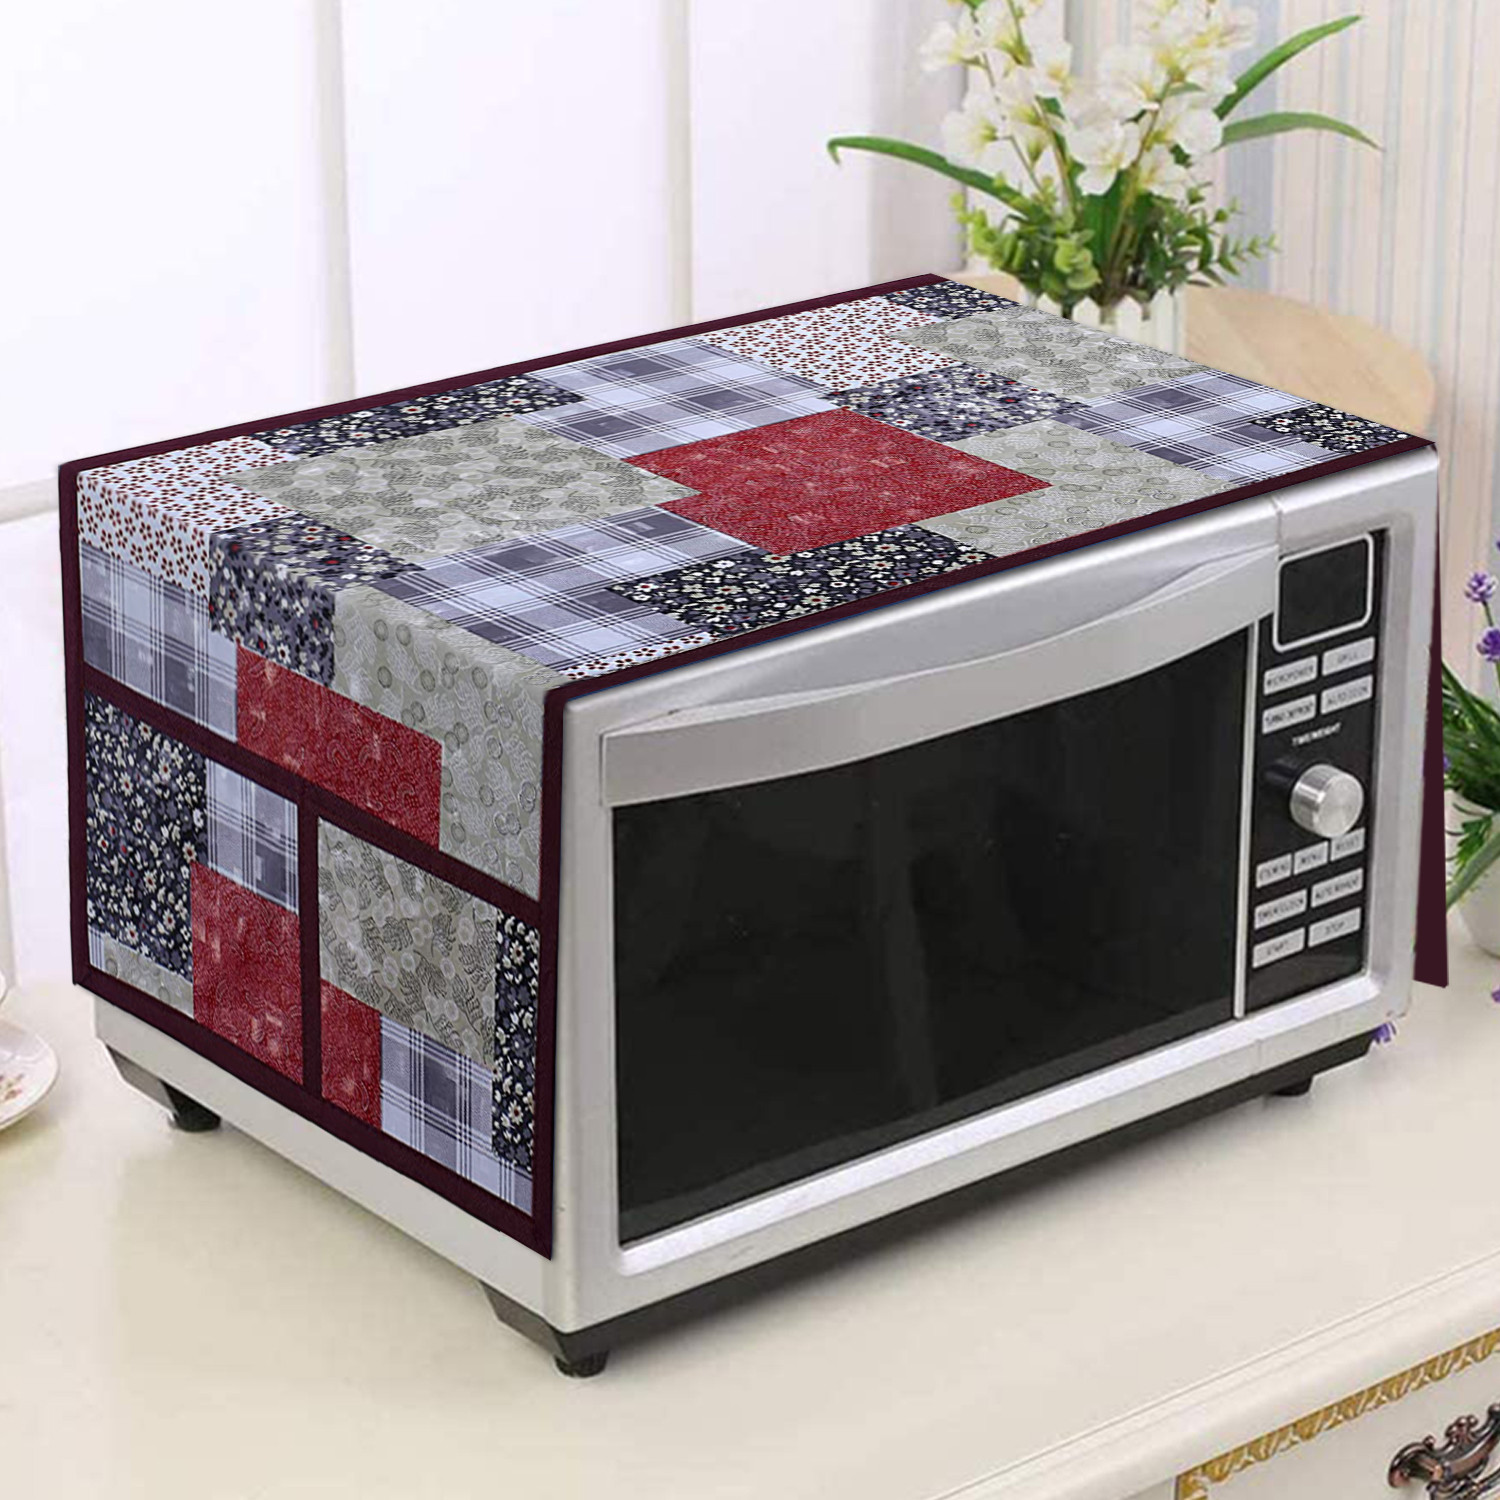 Kuber Industries Multicheck Printed PVC Decorative Microwave Oven Top Cover With 4 Utility Pockets (Multicolor)